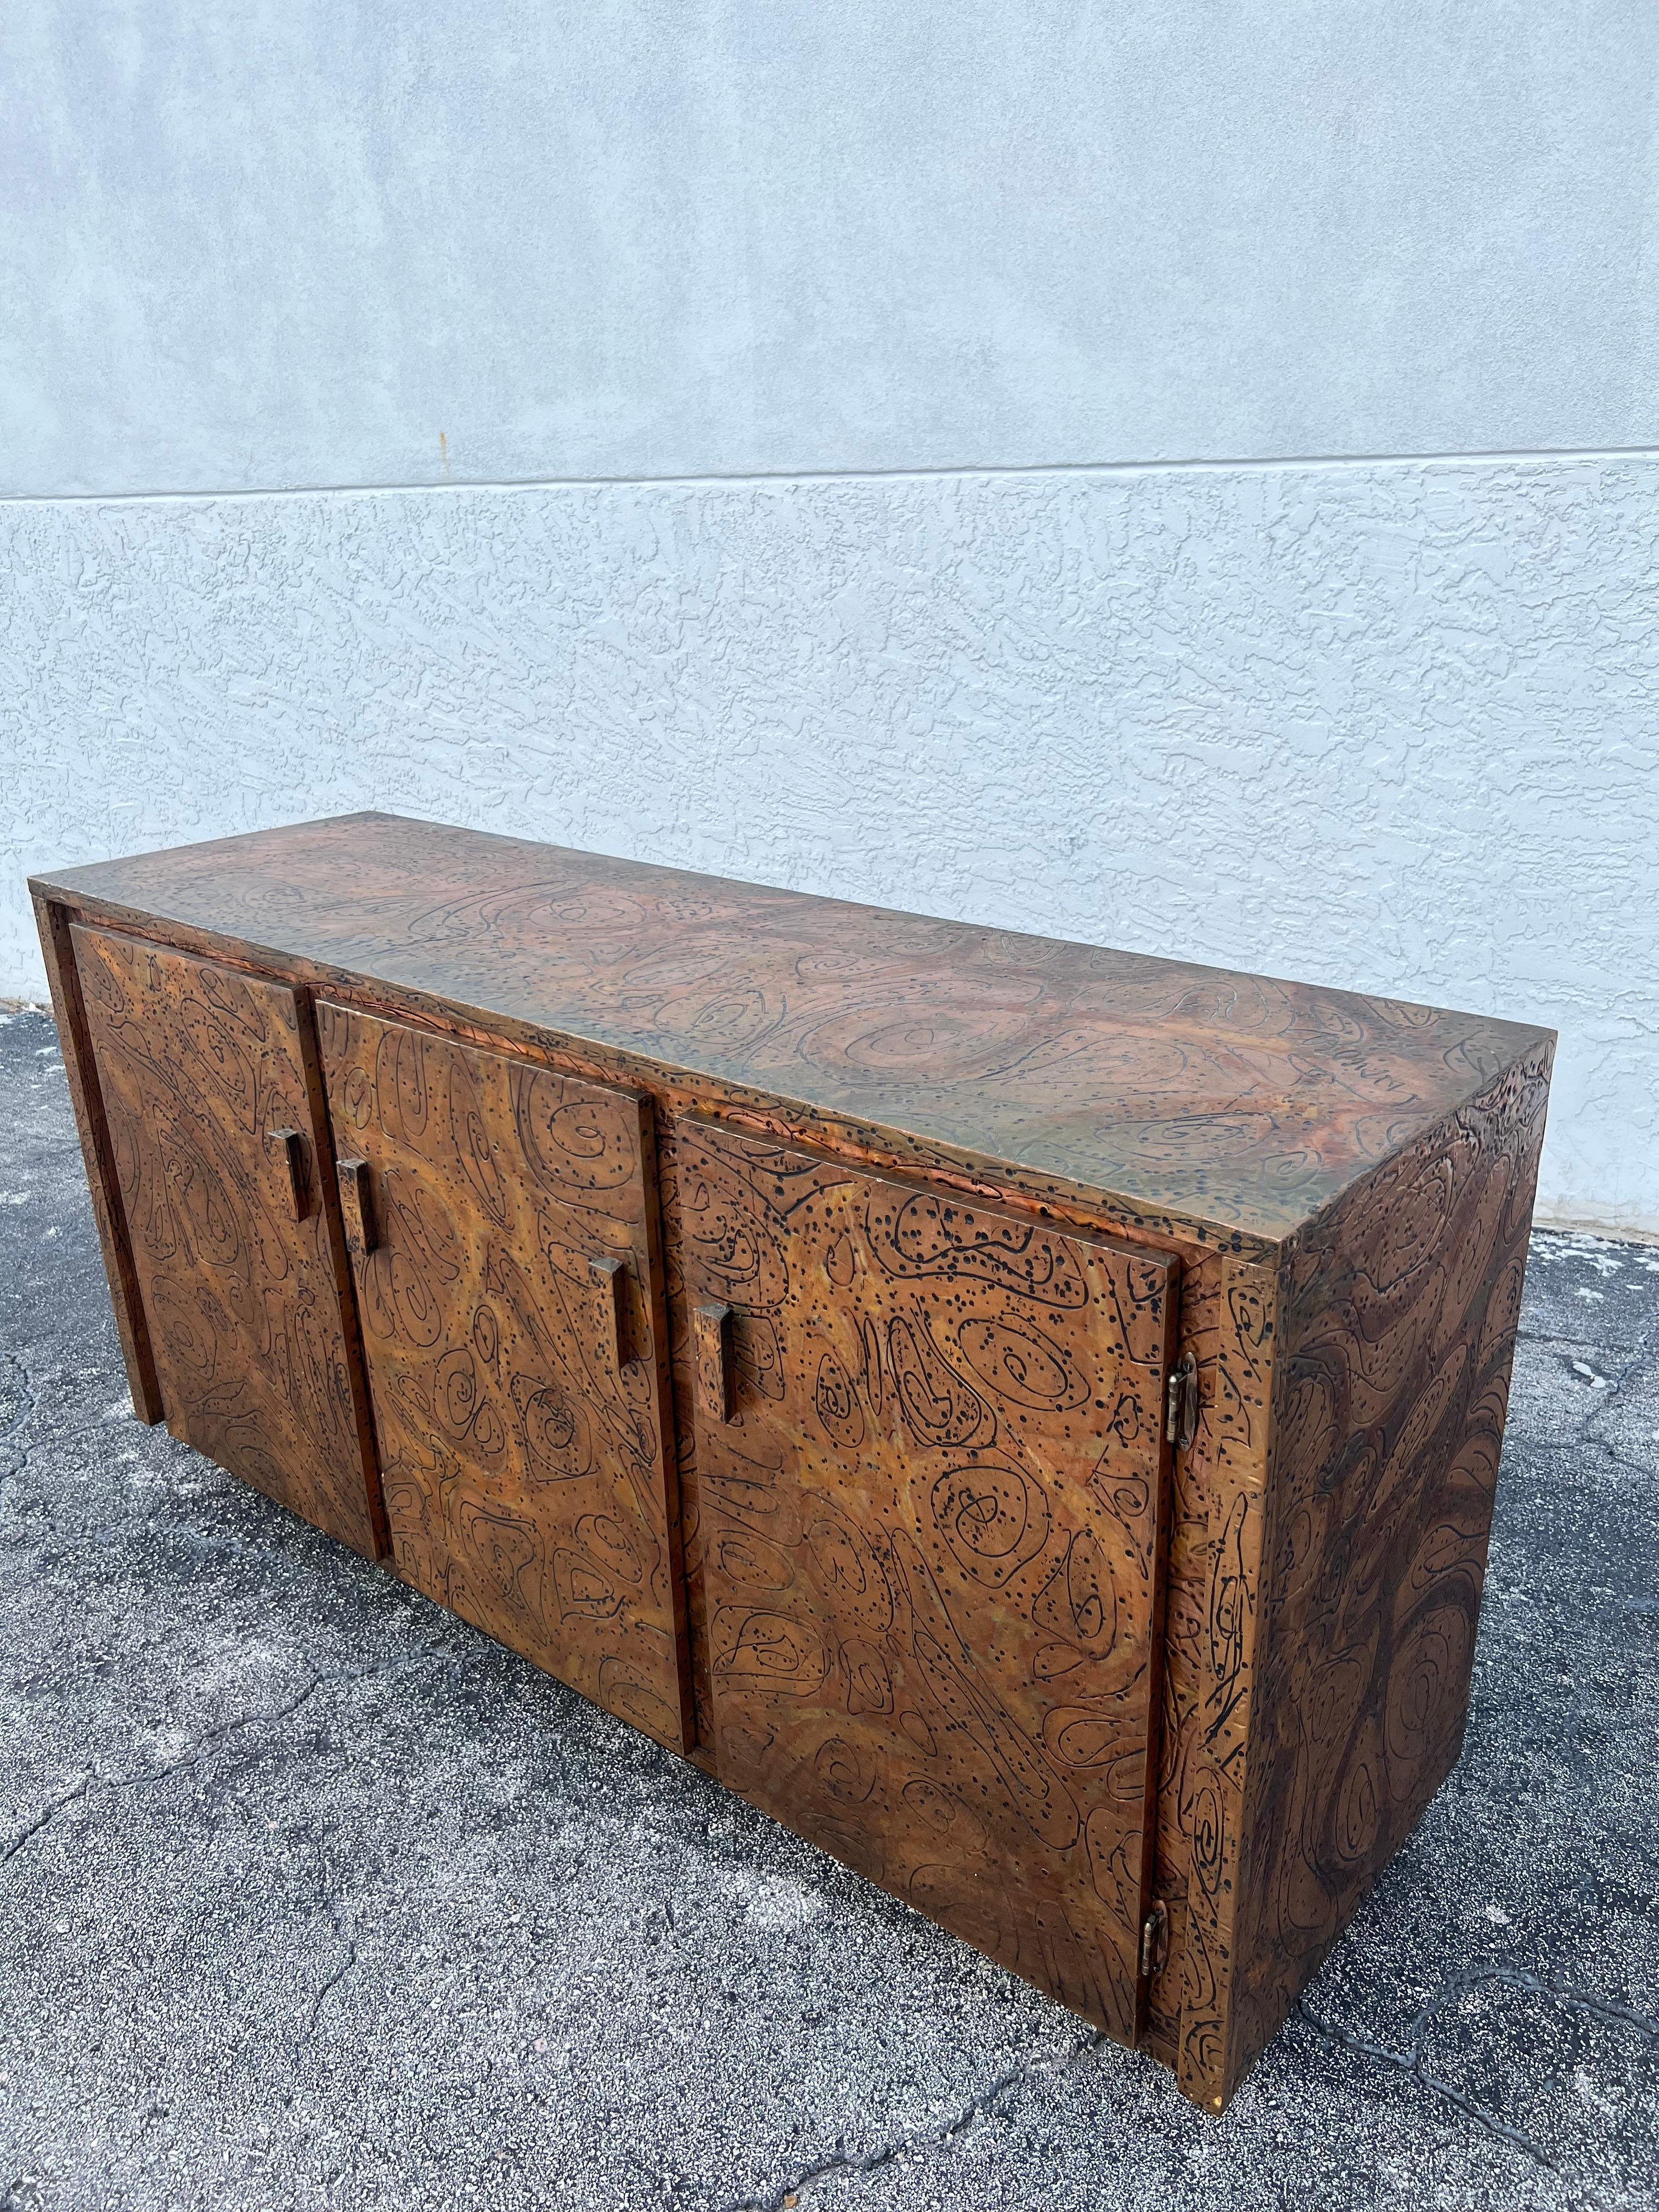 Rare Arenson Studios cooper clad credenza. Hand engraved abstract designs throughout. Interior burlap shows signs of wear and minor areas of wear to the clad (please refer to photos). Some looseness on top surface where the copper lifted from the